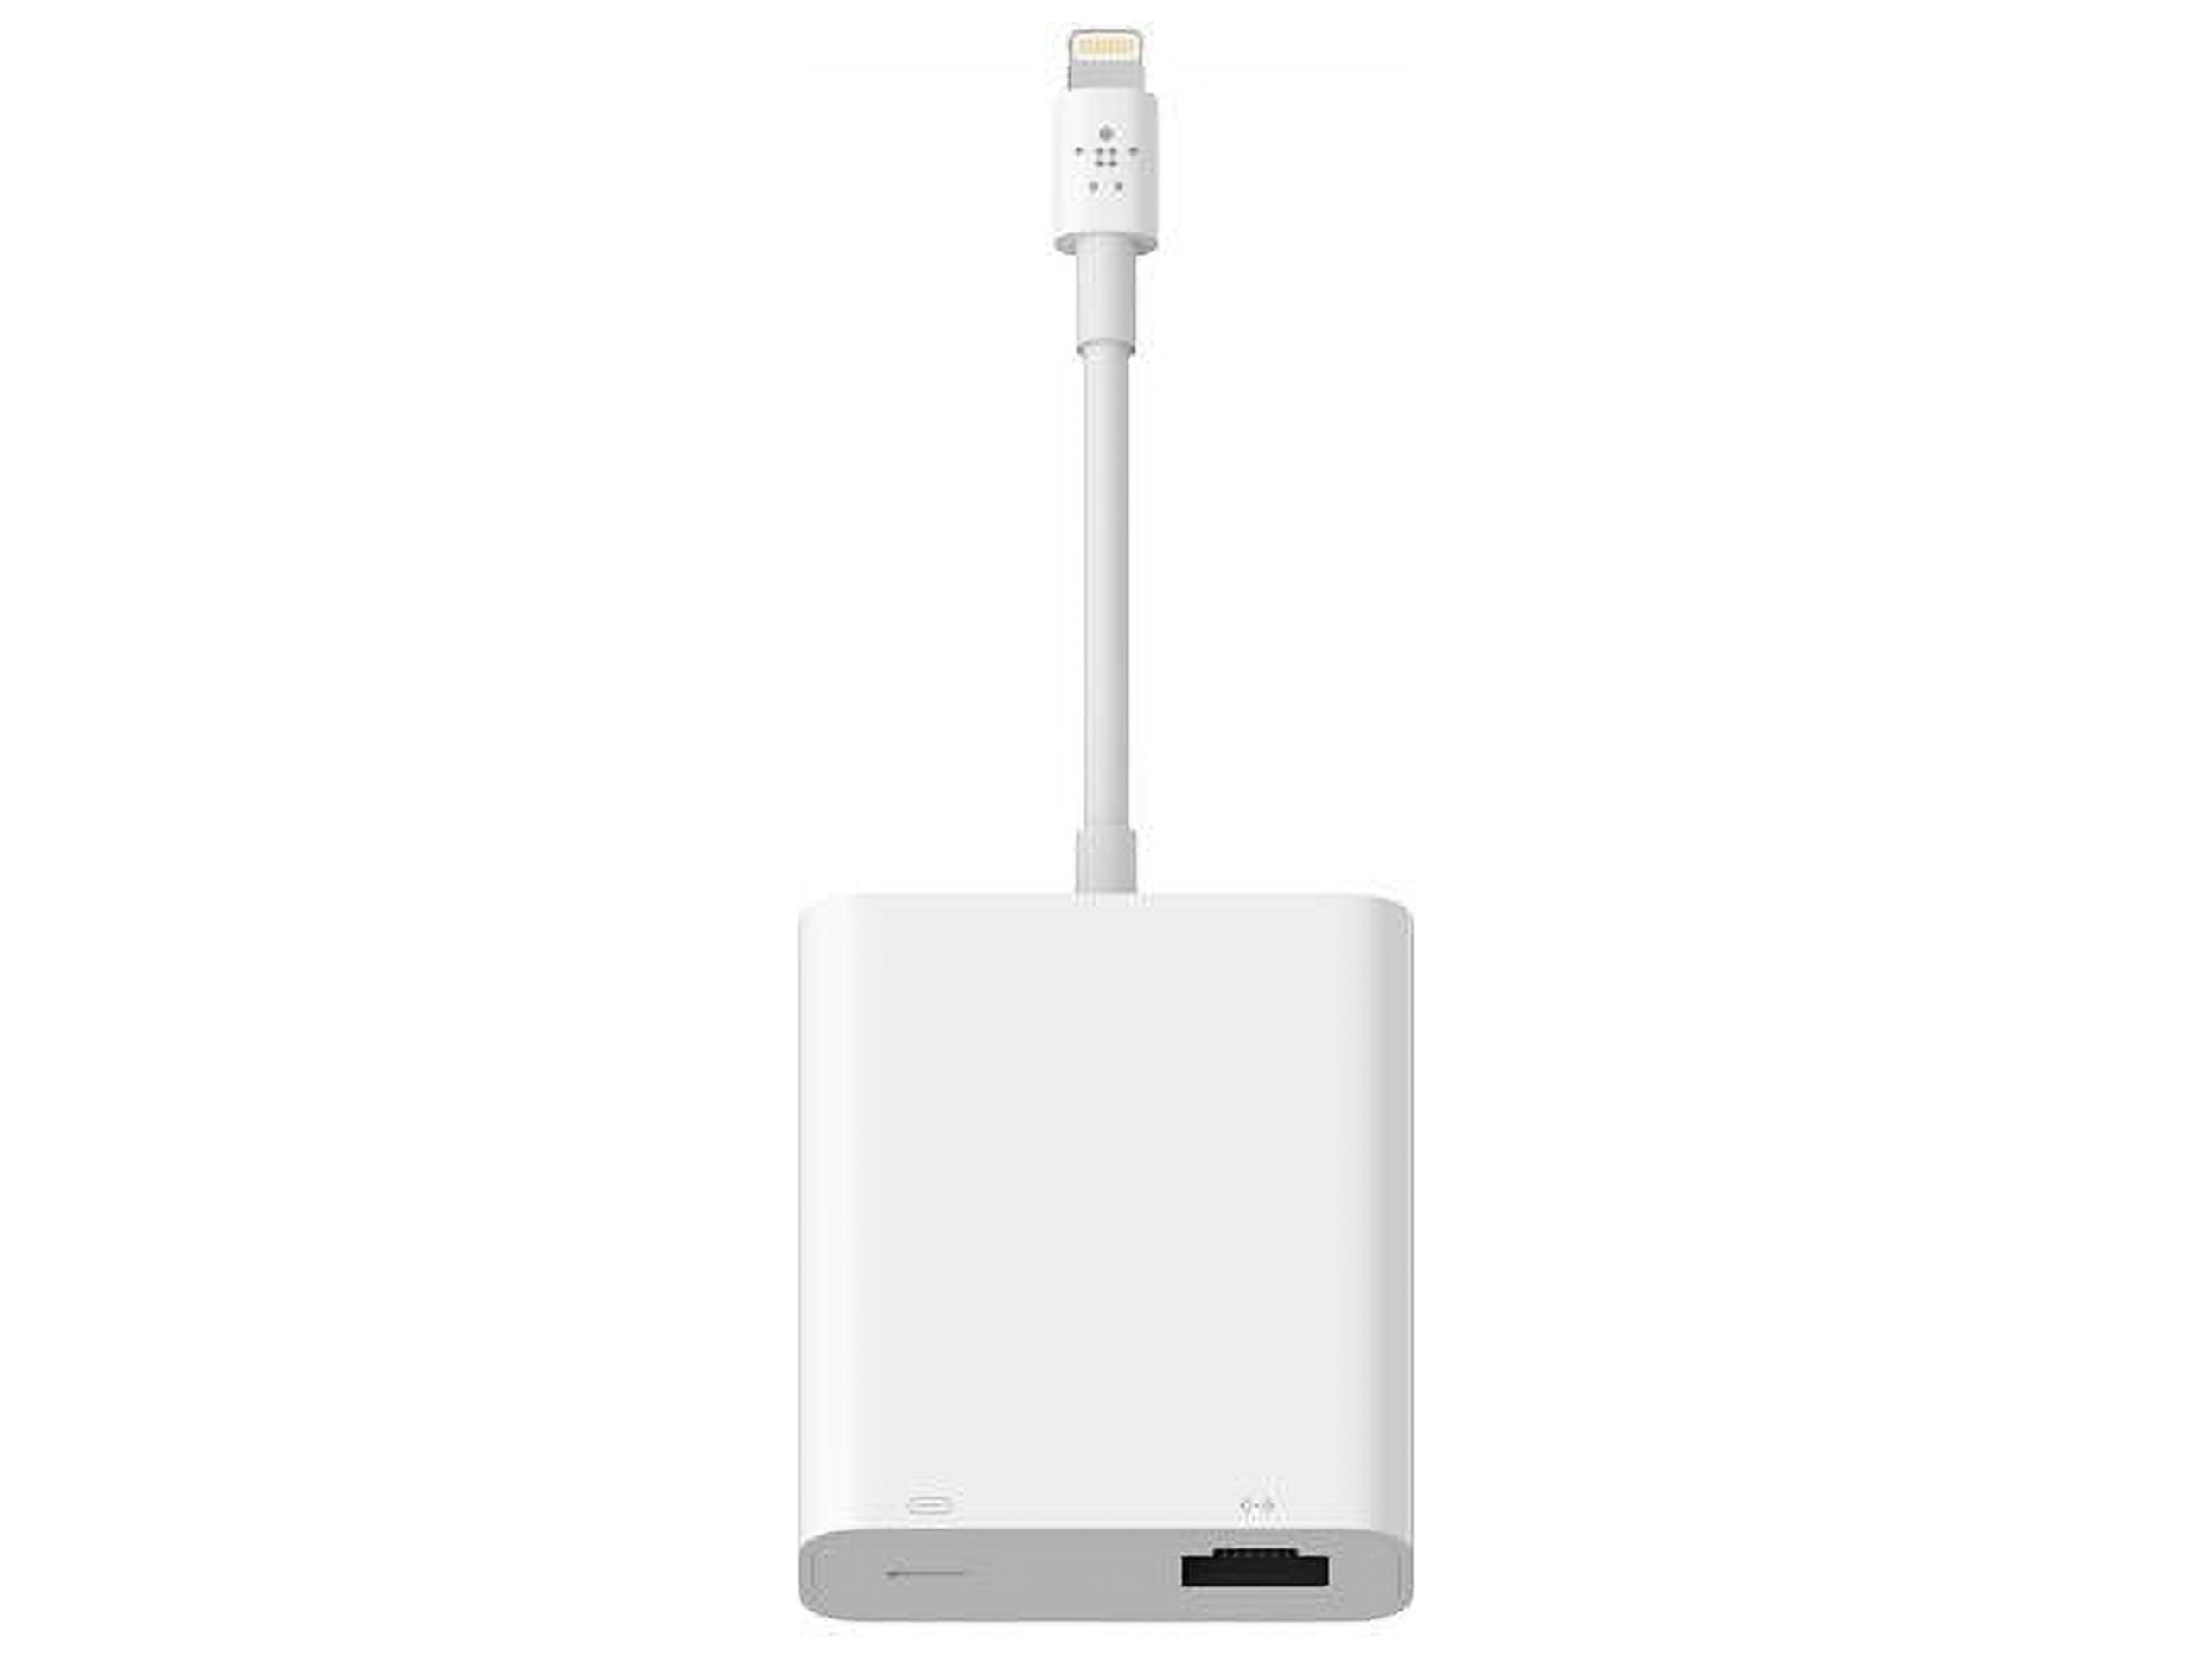 Belkin Ethernet + Power Adapter with Lightning Connector - image 1 of 5